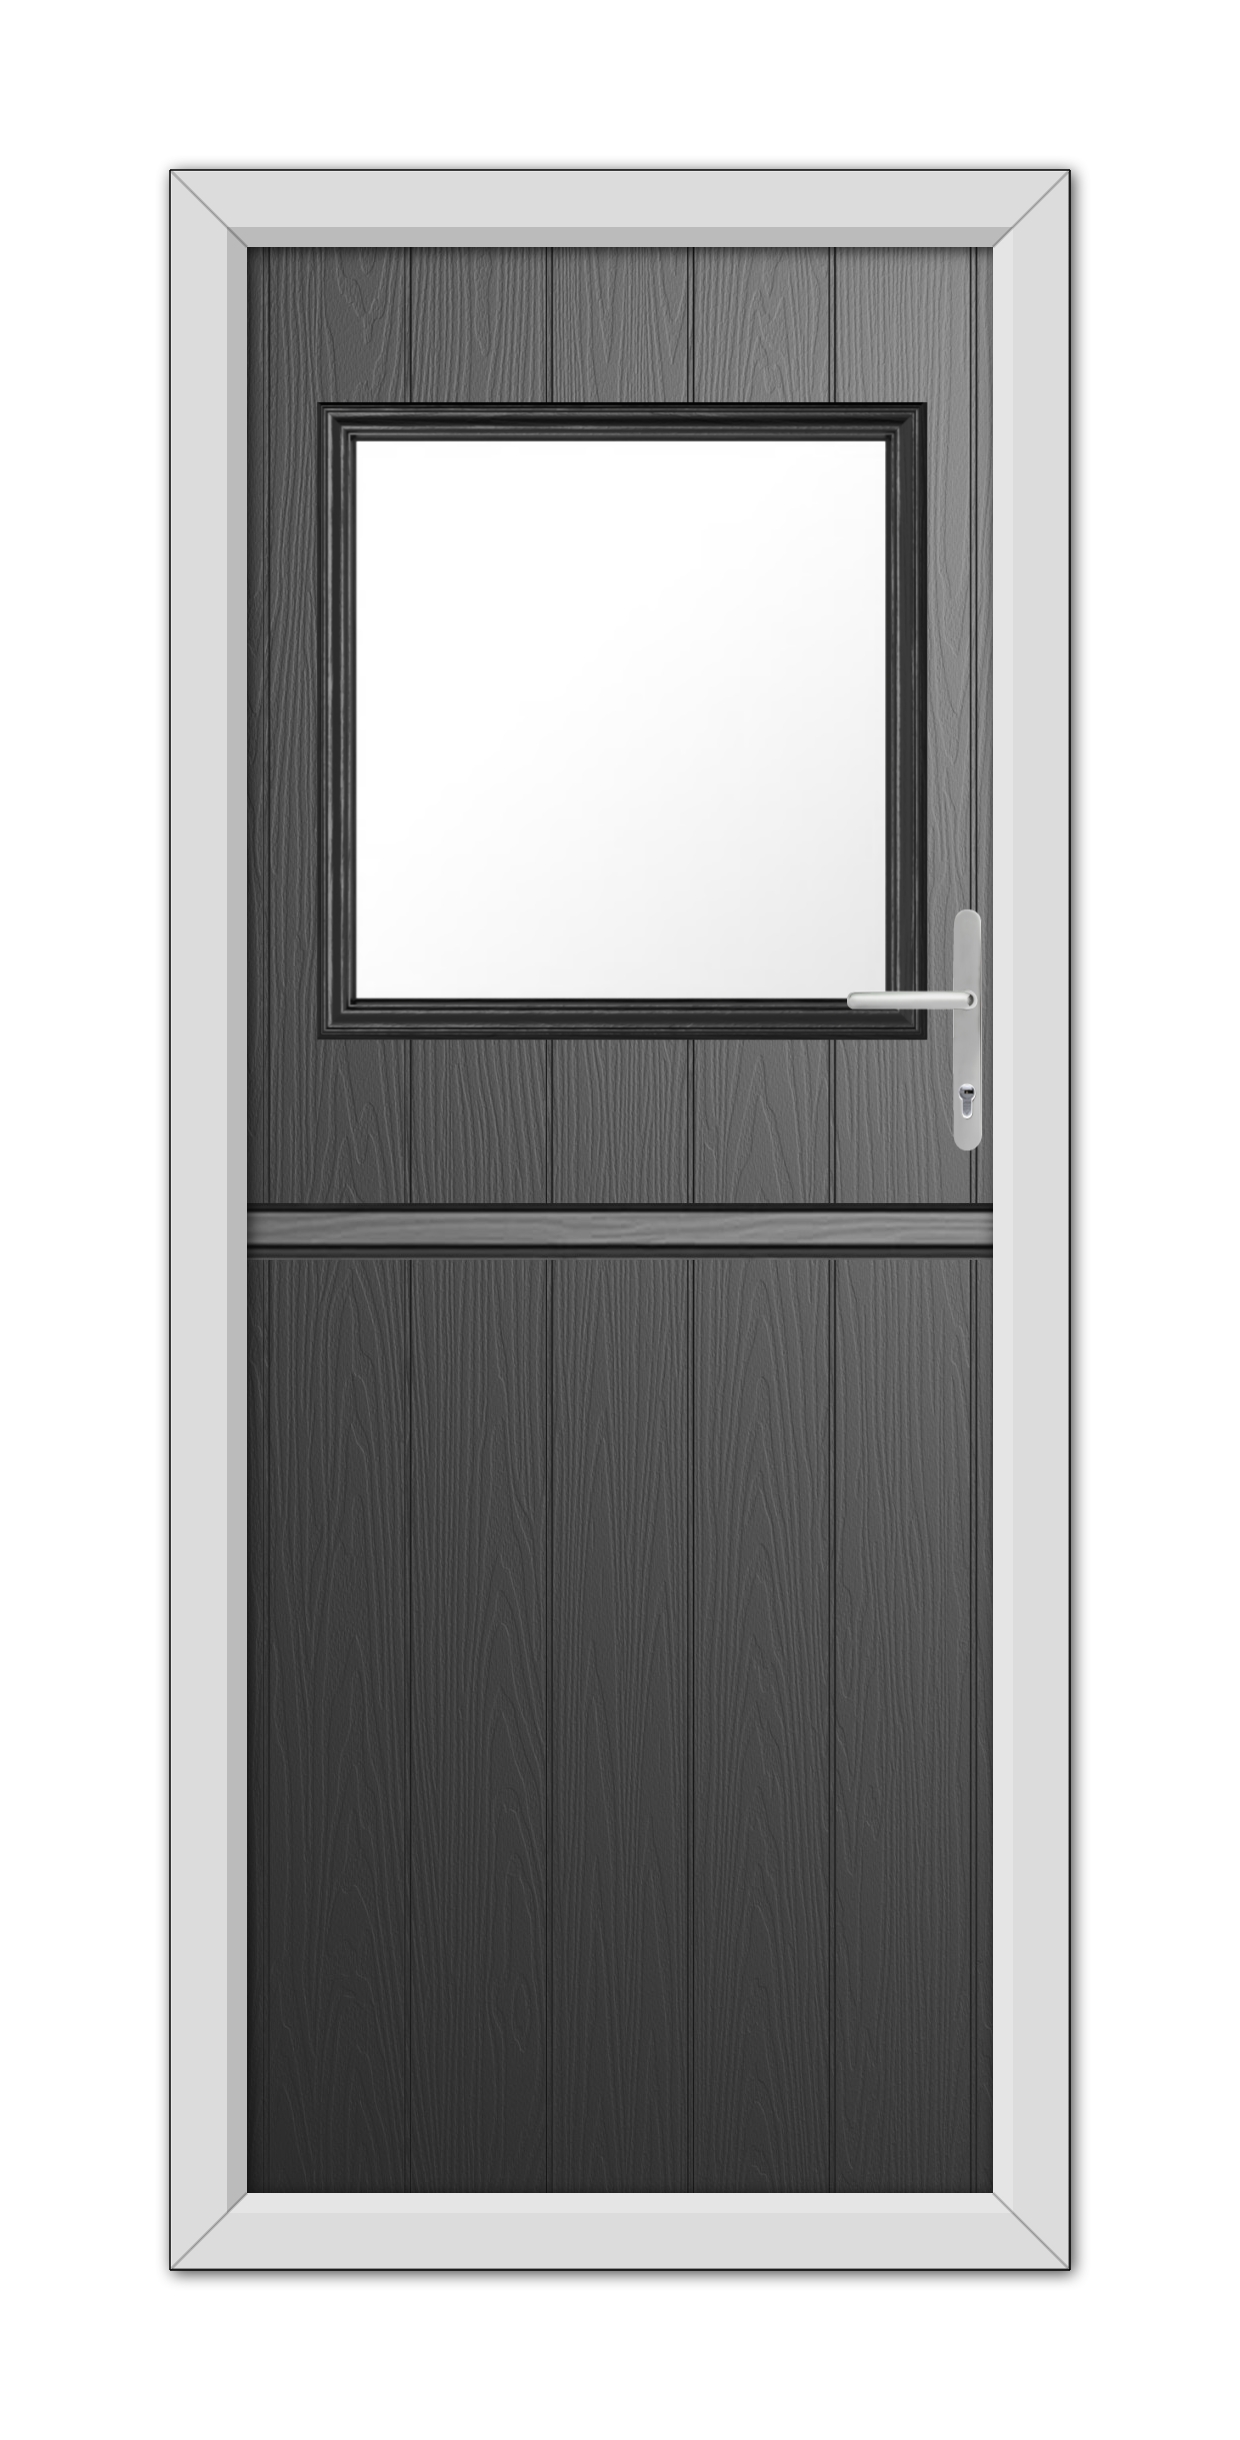 A modern, Black Fife Stable Composite Door 48mm Timber Core featuring a small square window at the top, a metal handle on the right, and a silver frame.